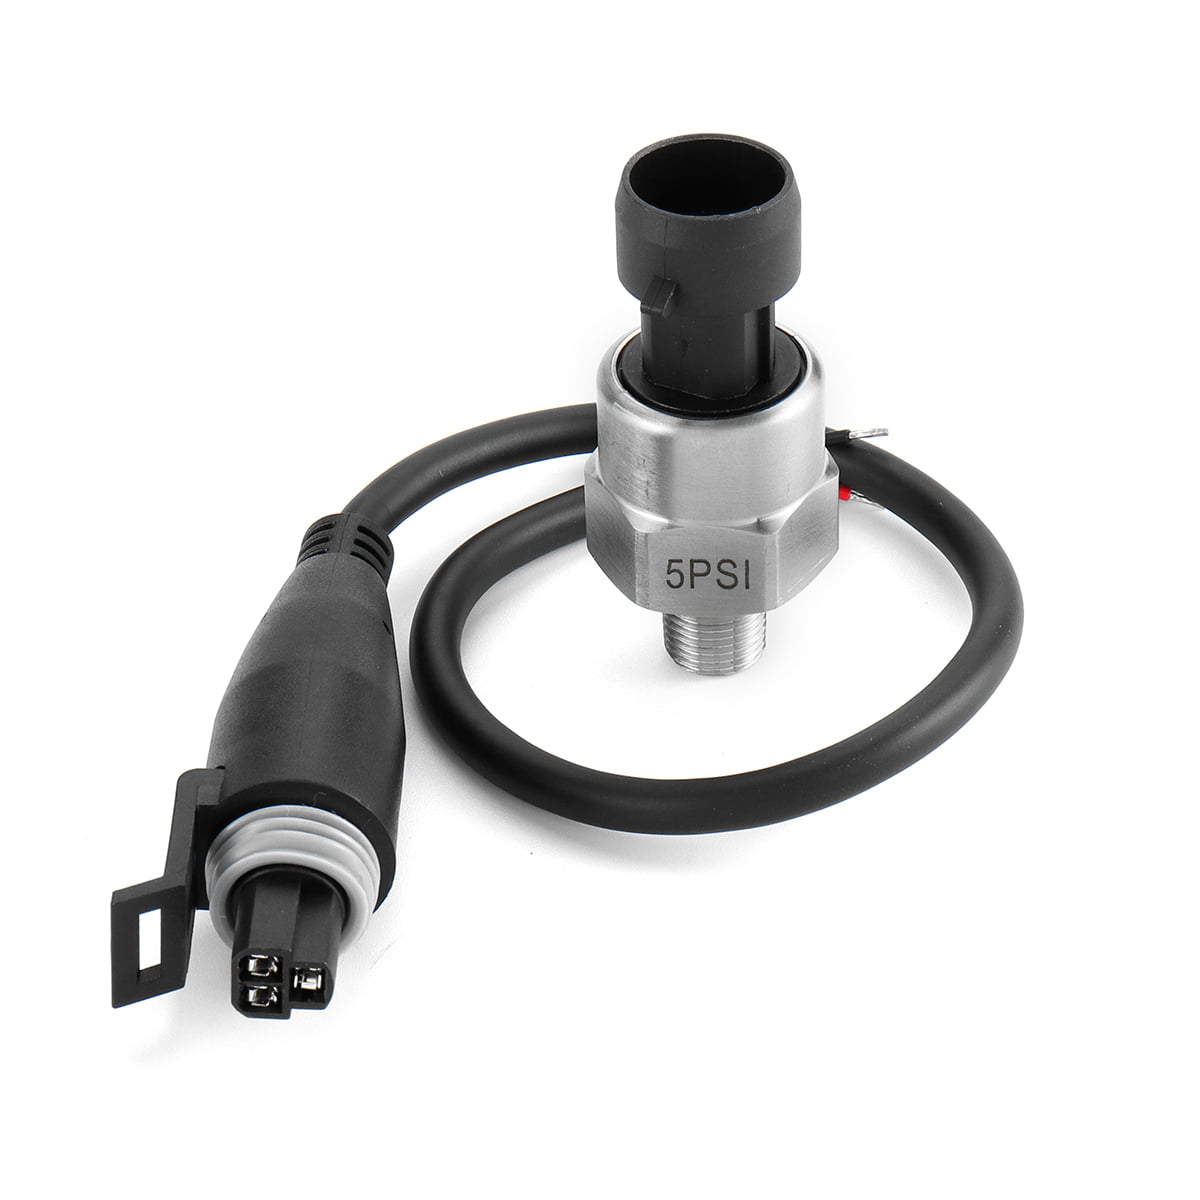 1pc 1/8NPT Thread Stainless Steel Pressure Transducer Sender Sensor for Oil Fuel Air Water Include ​30 psi 100 psi 150 psi 200 psi 300 psi 500 psi 150PSI 